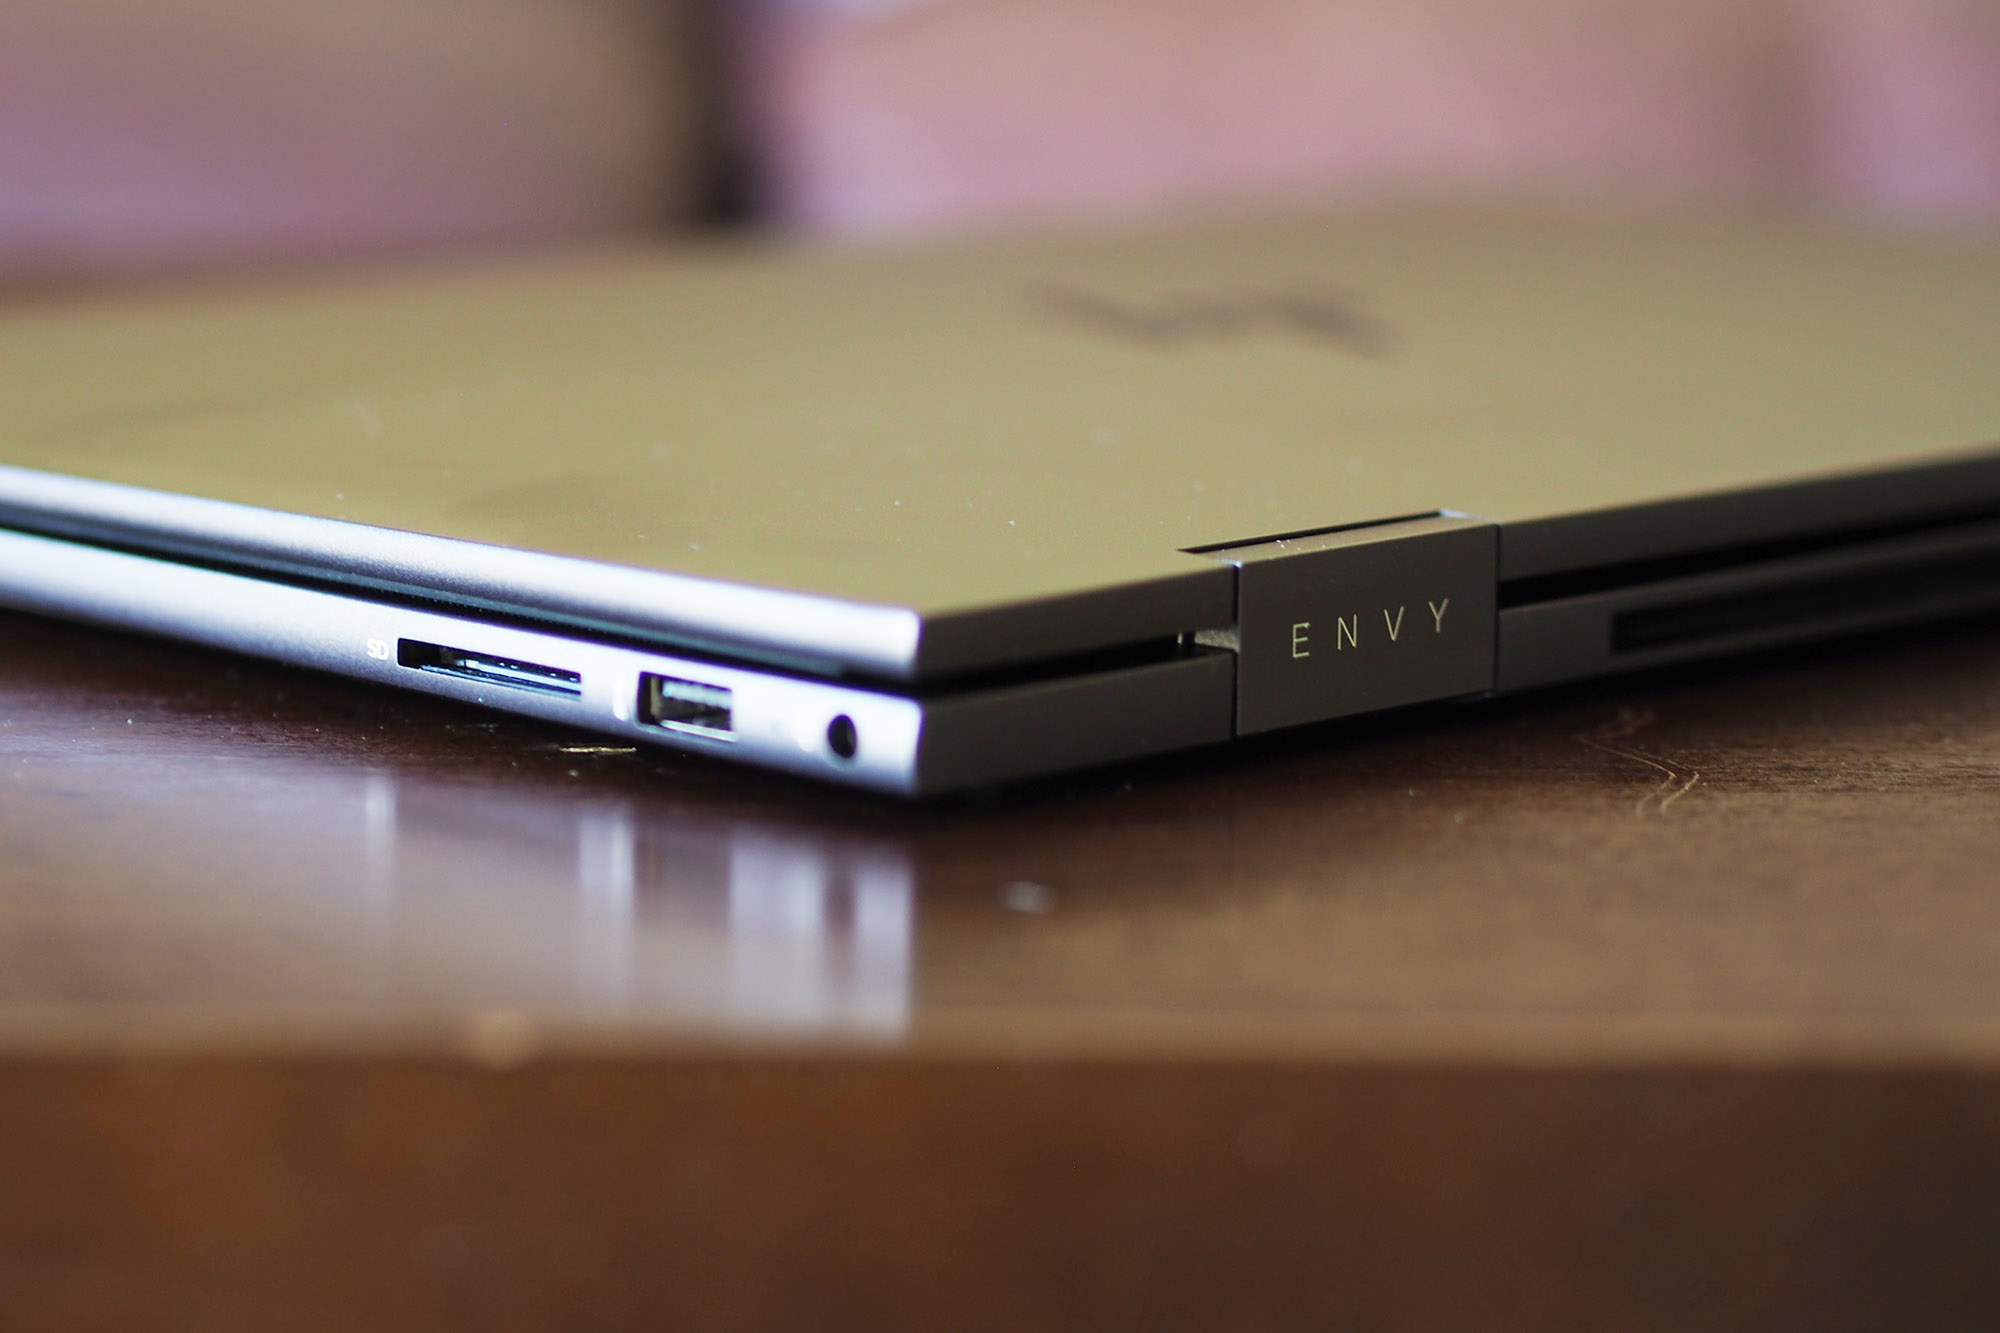 HP Envy x360 15 side view showing ports and back of chassis.